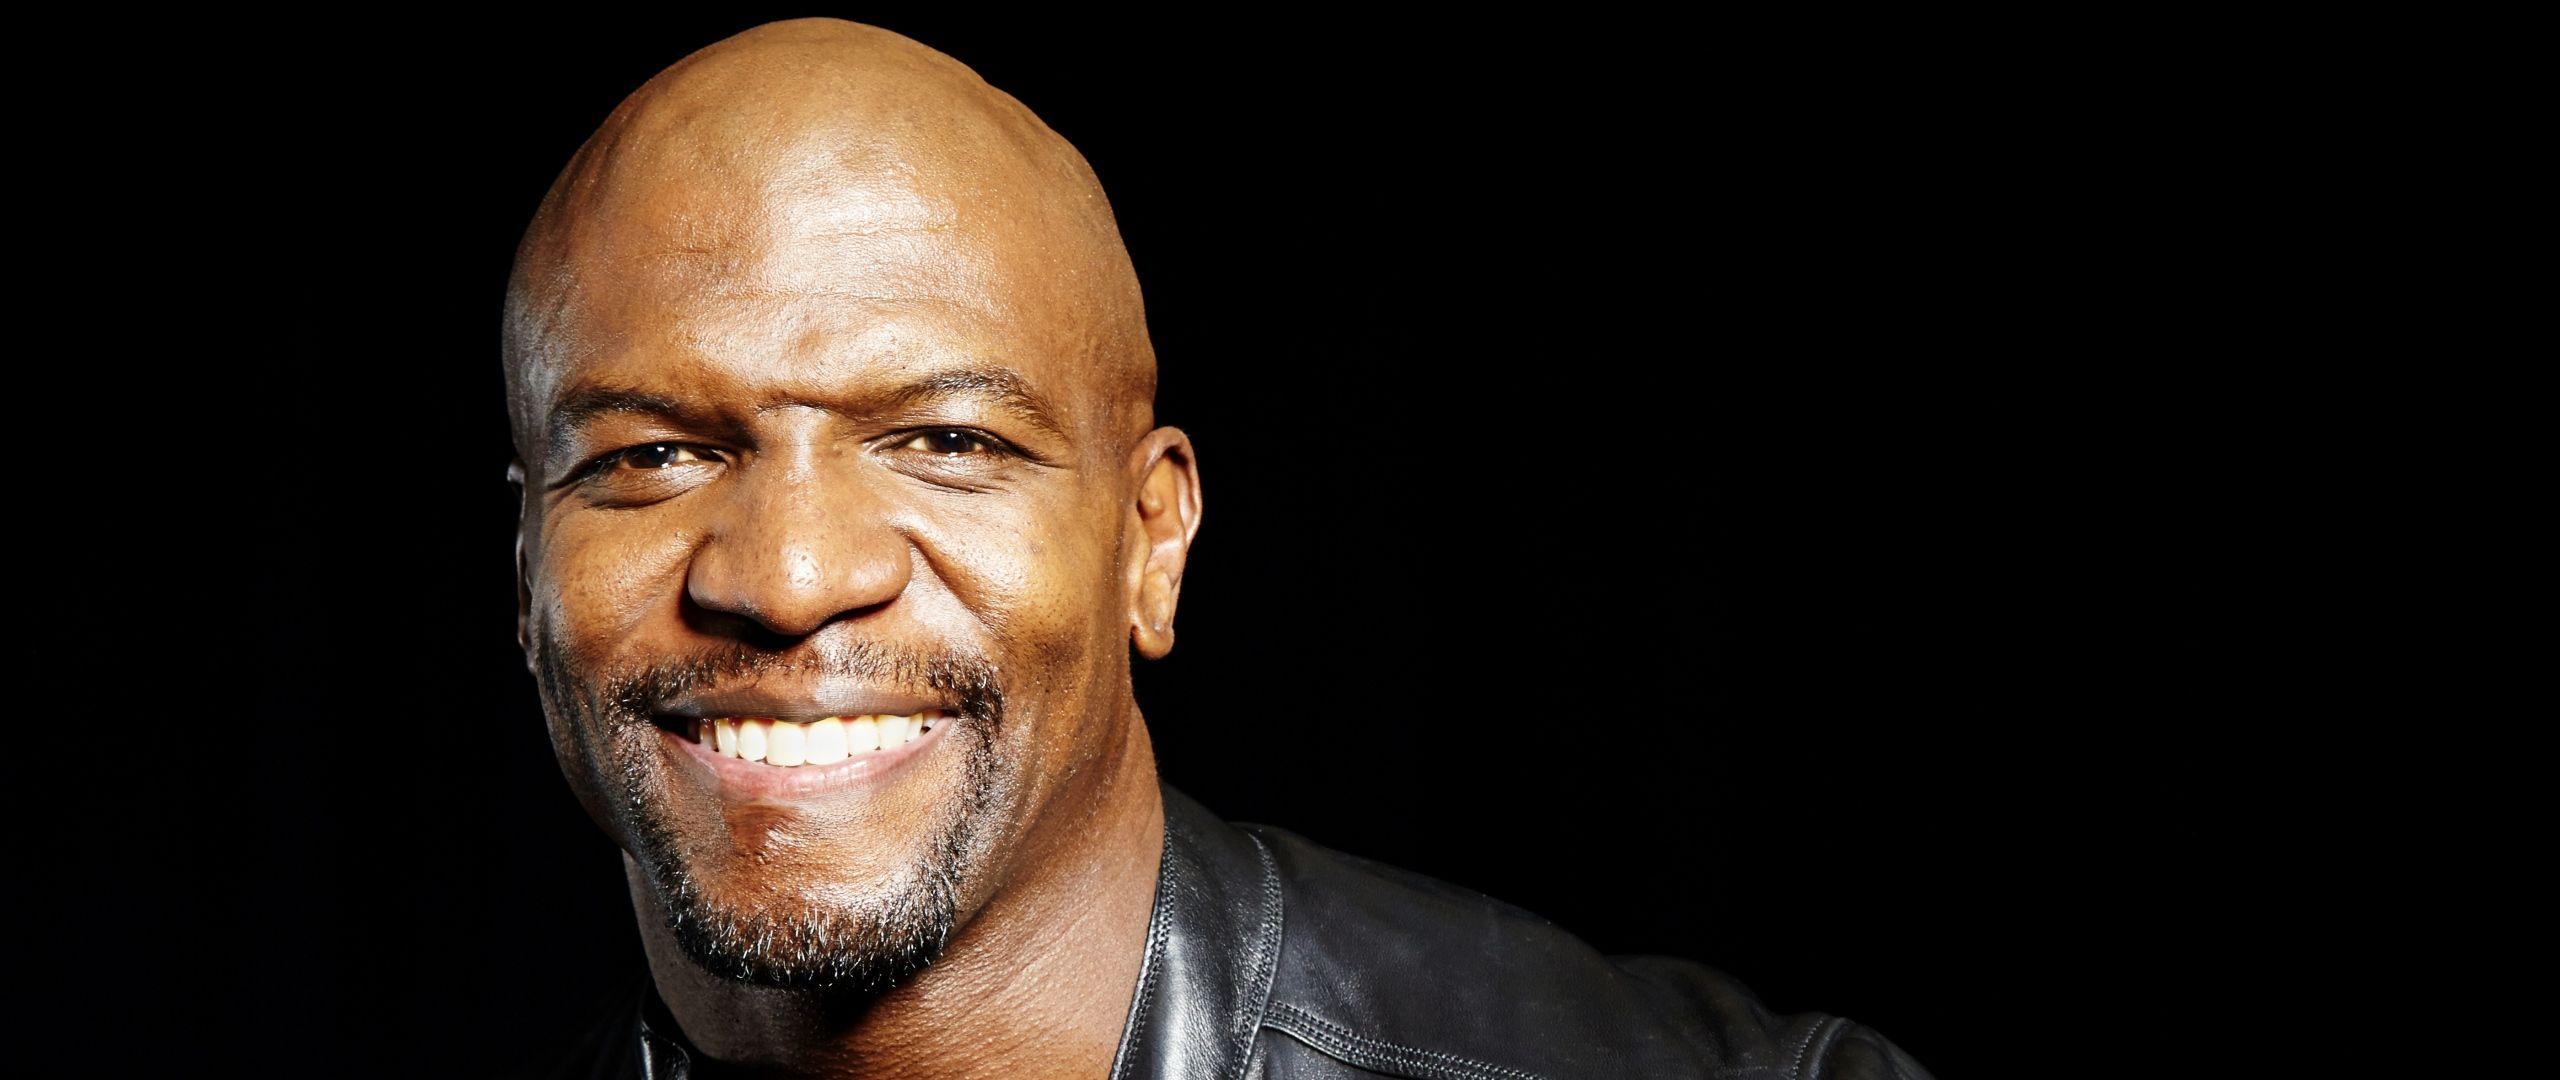 Download Wallpaper 2560x1080 Terry crews, Actor, Smile, Leather